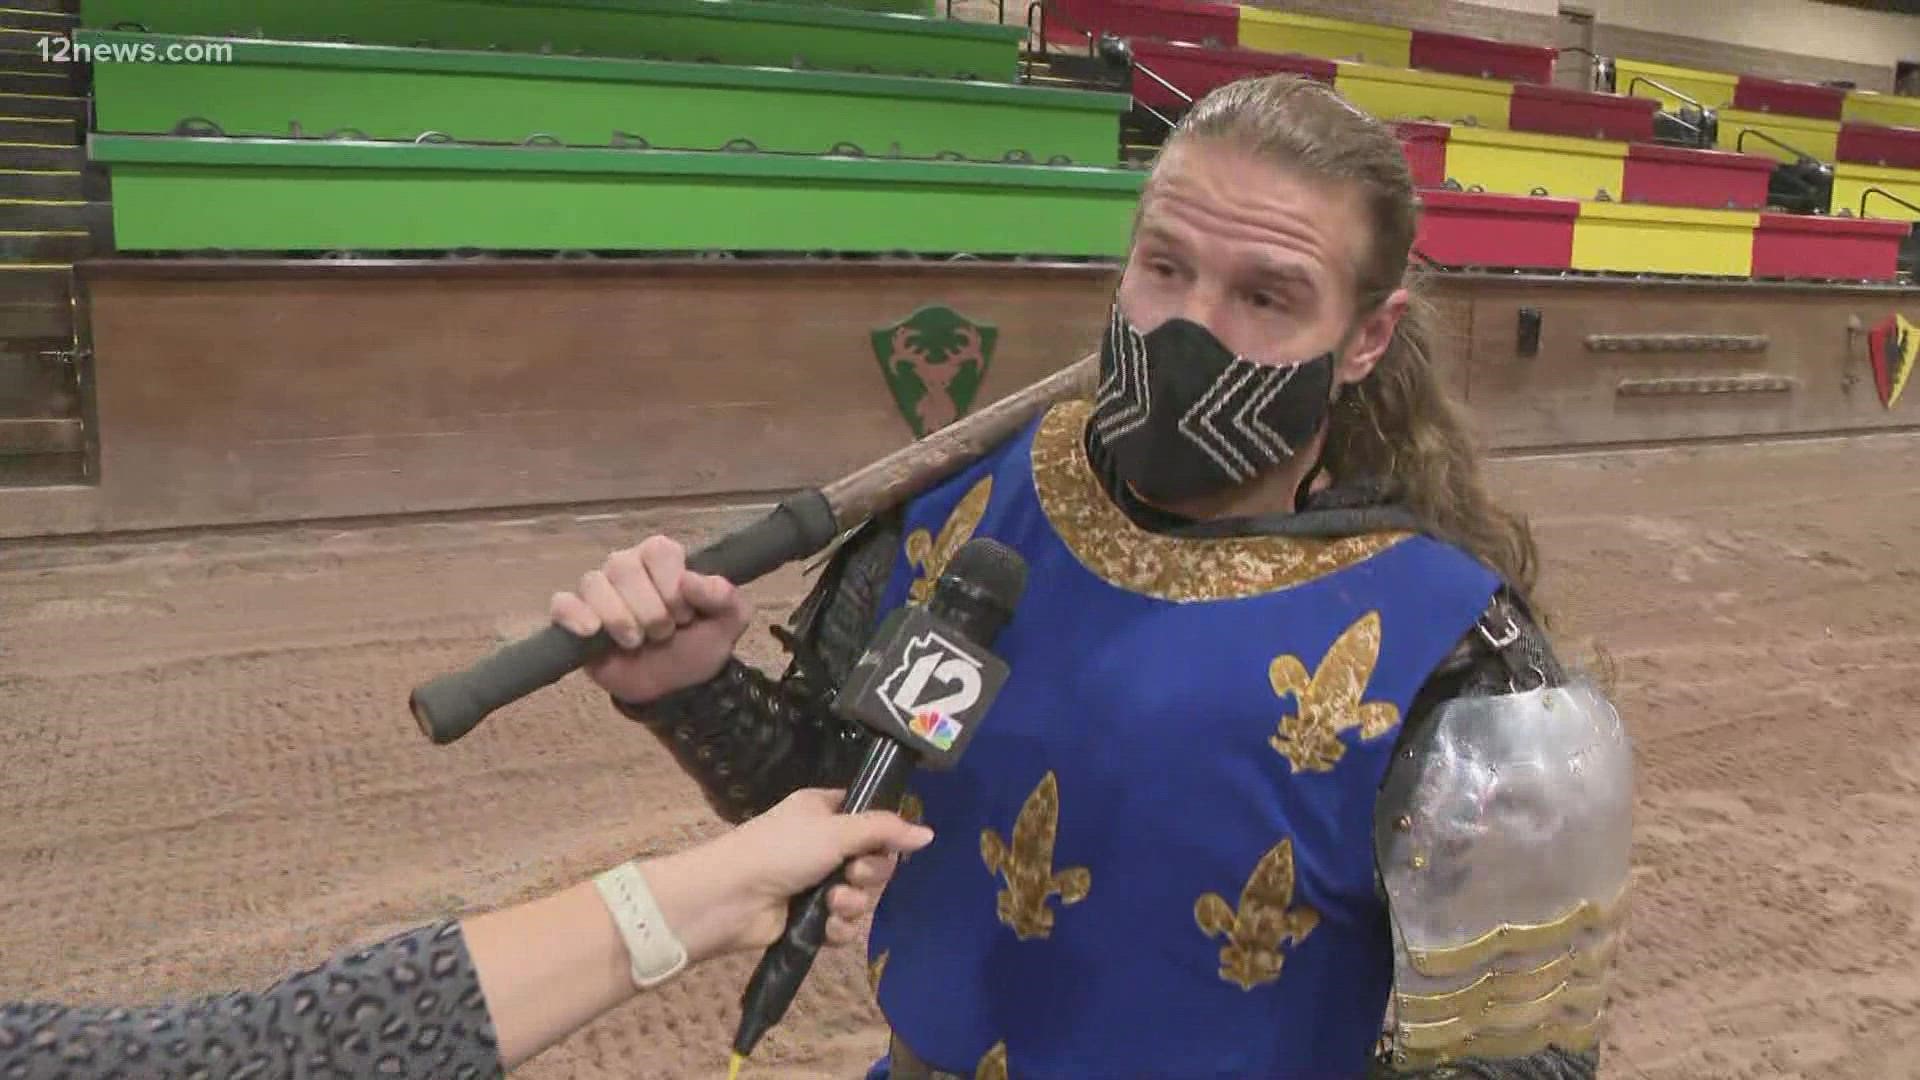 Medieval Times in Scottsdale is looking for a few good knights